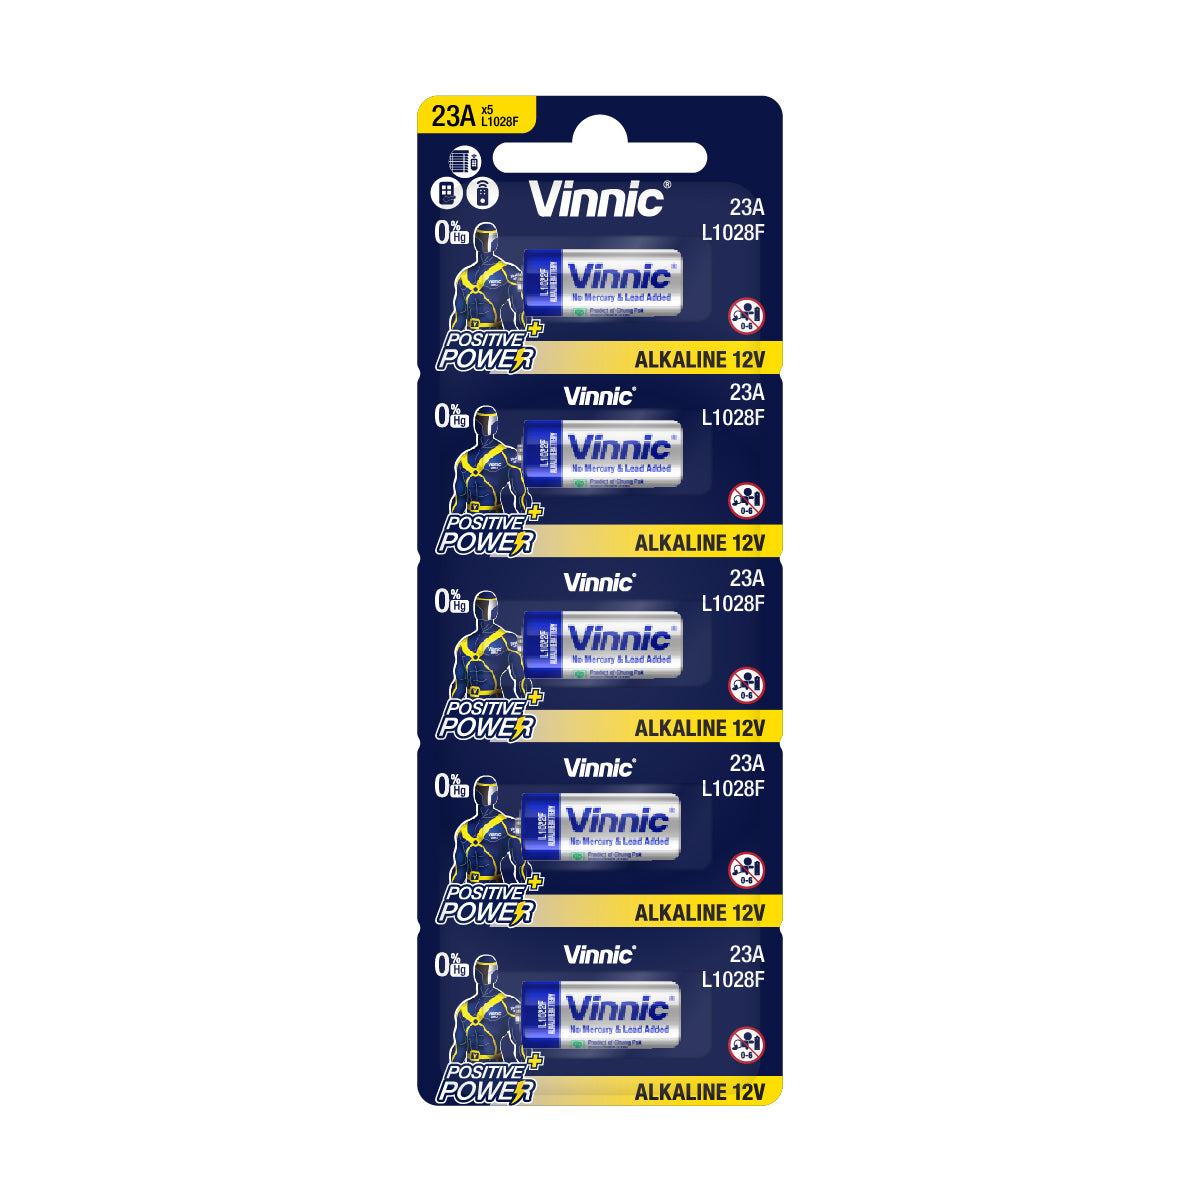 Vinnic High Voltage Alkaline Button Cell 23A / L1028F (12V) - 5Count